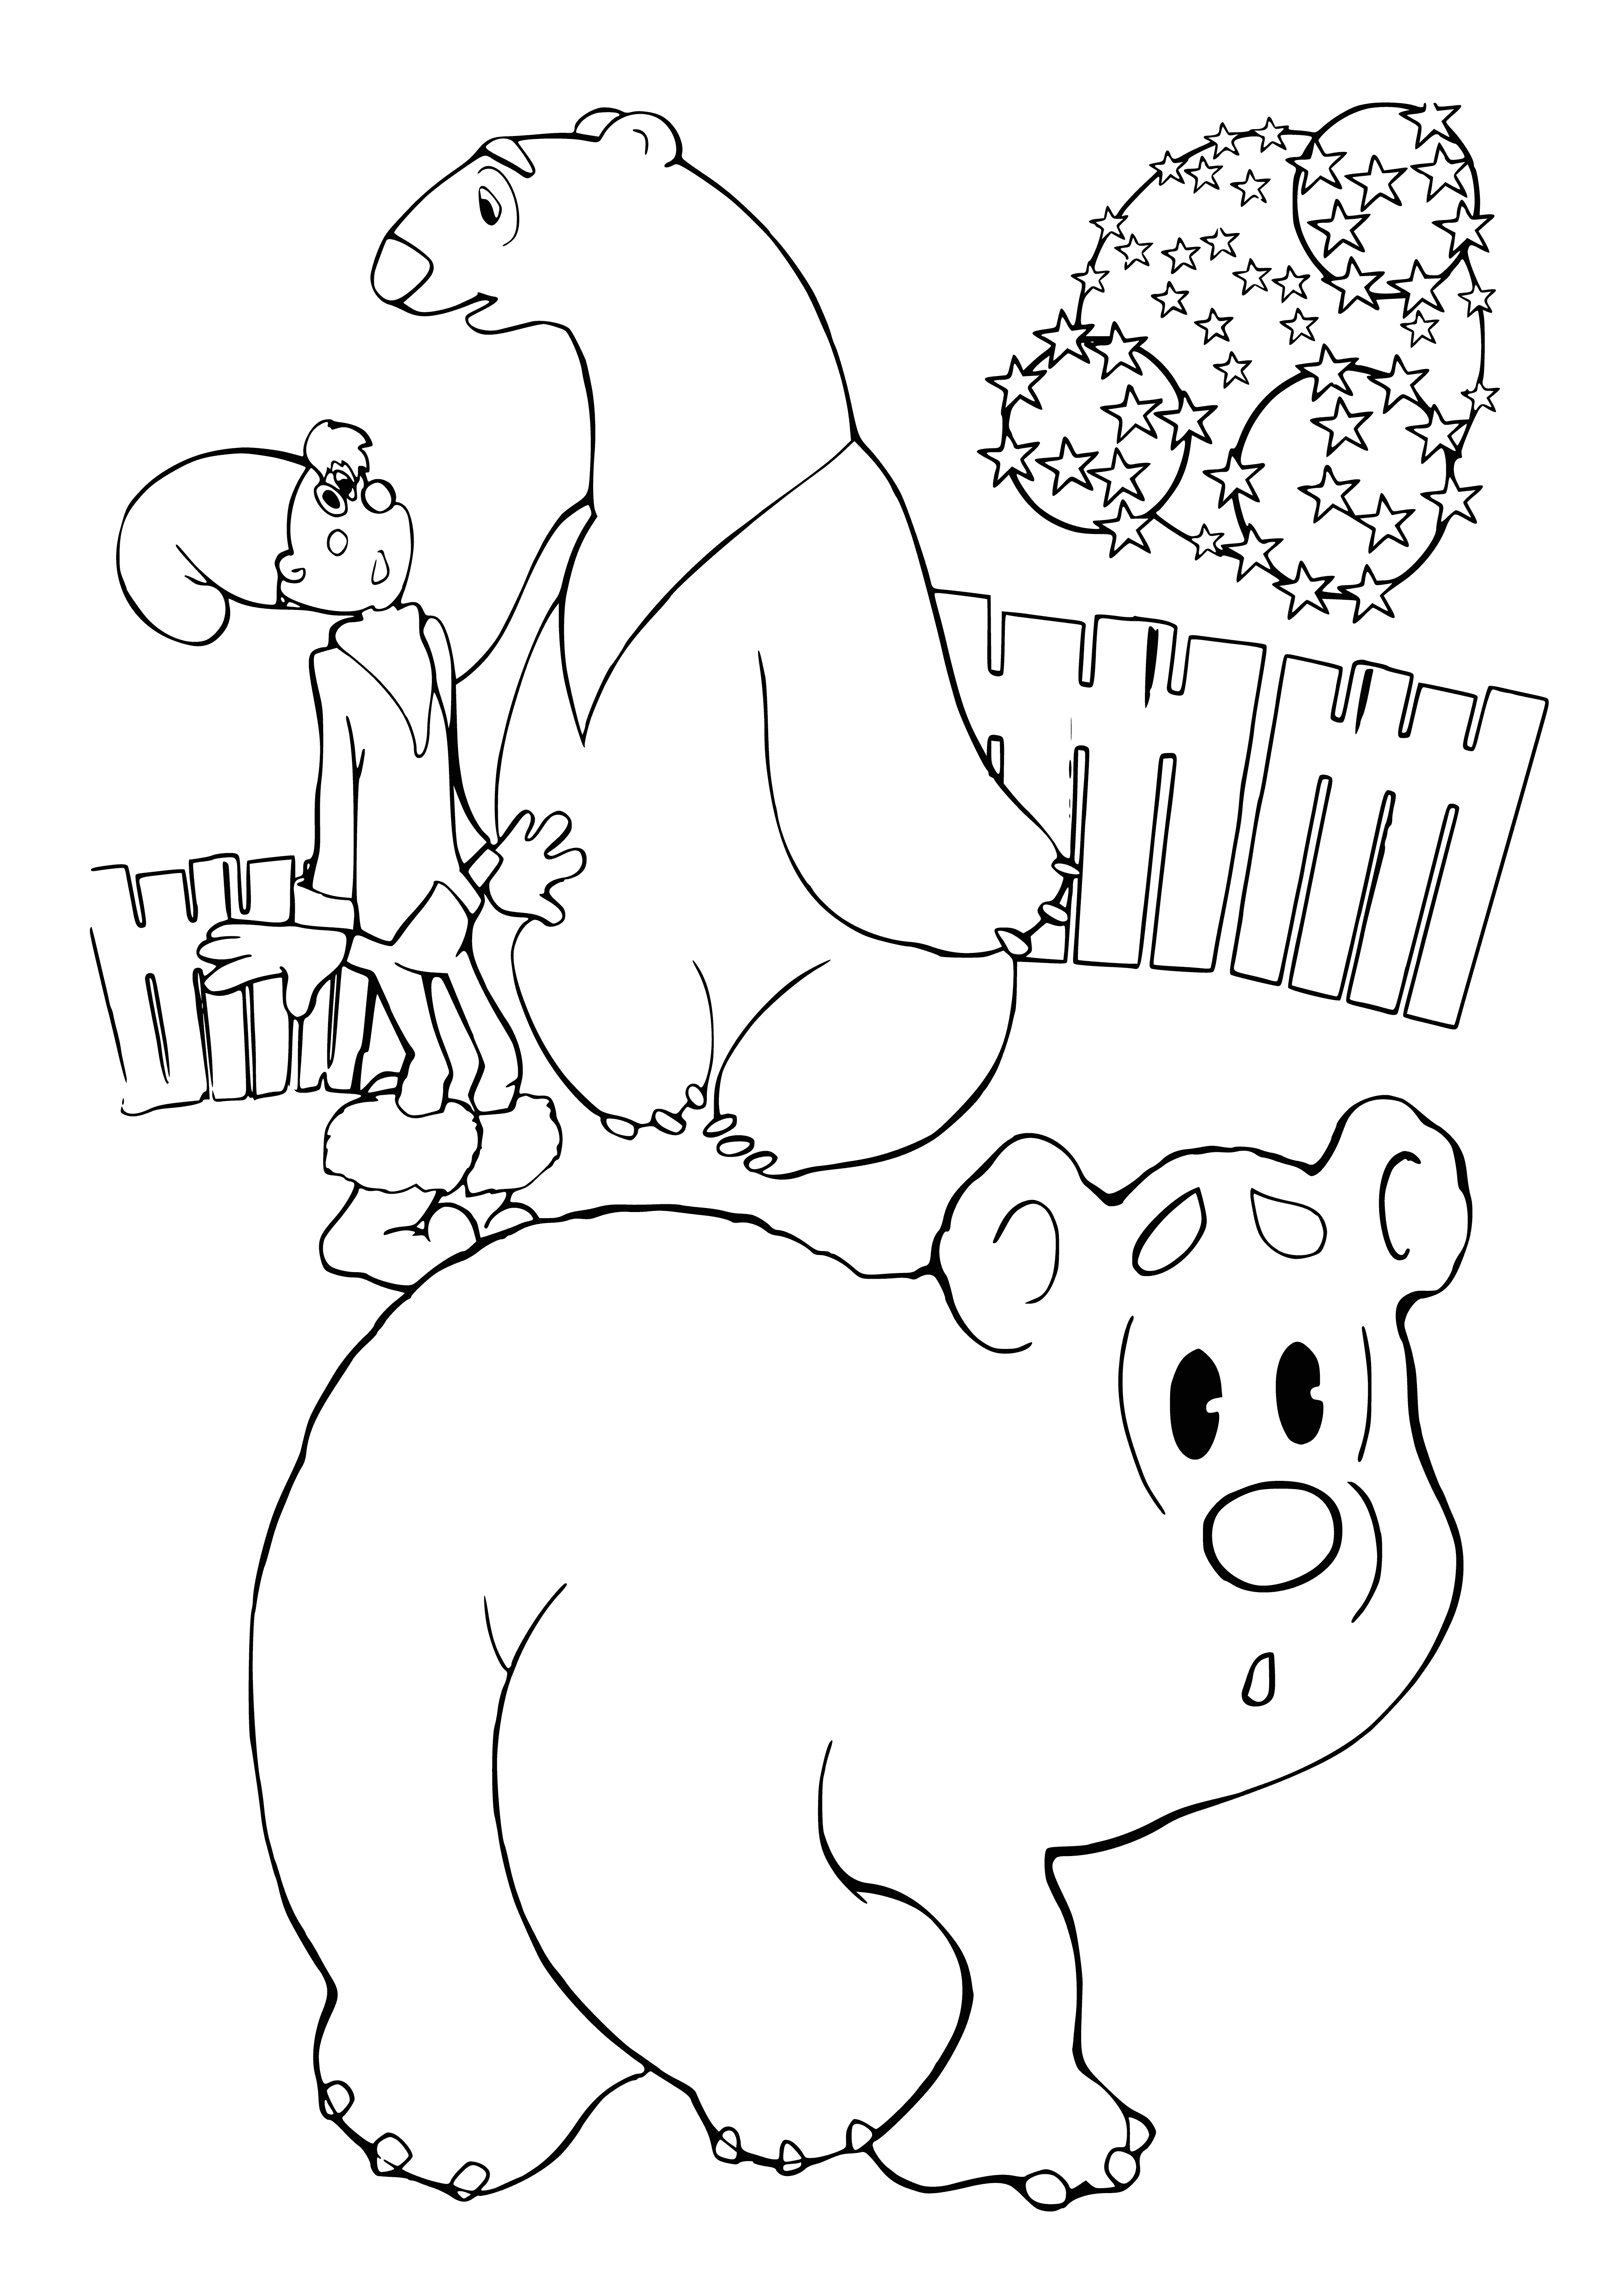 coloring page: Umka is a black and white dog who lives with a family, loves playing with the kids and chasing chickens in their garden.